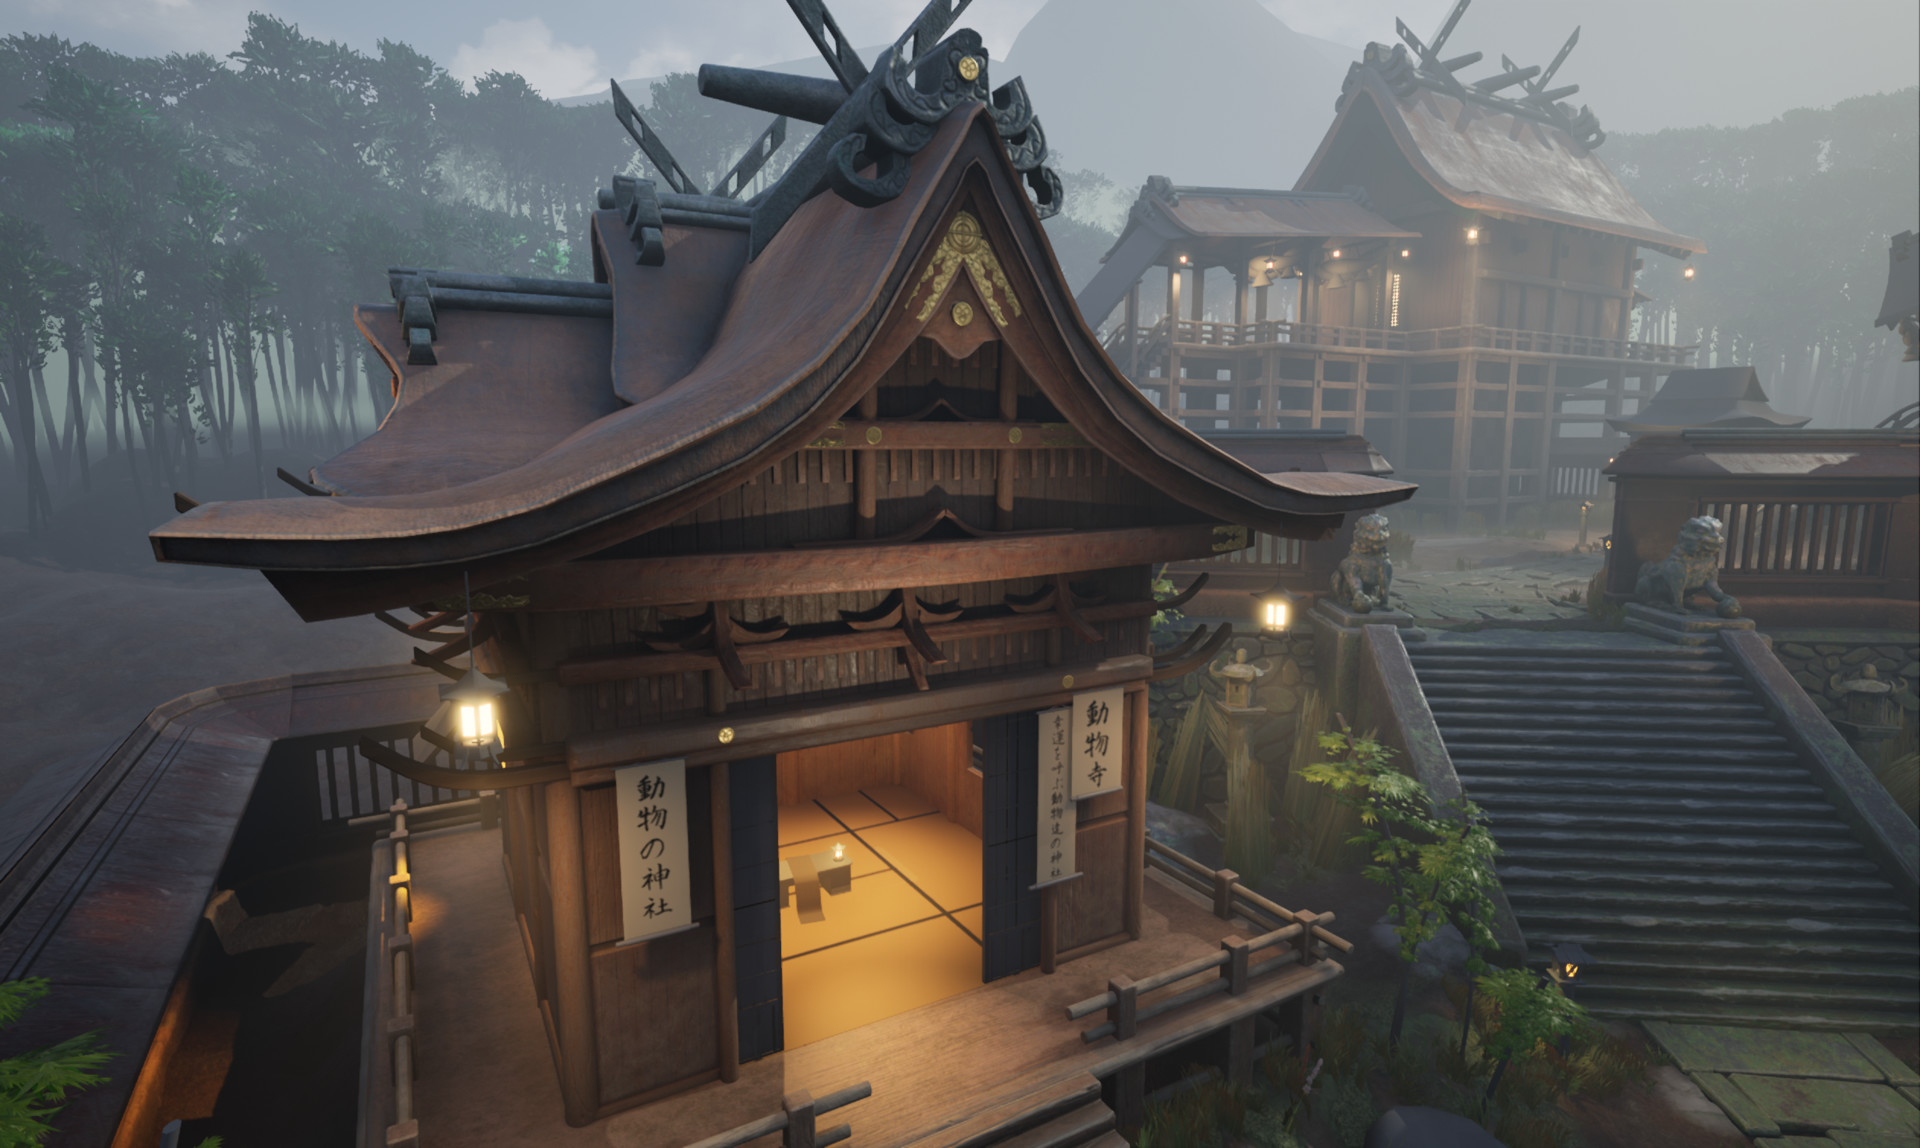 High in the sky screenshot observing the calligraphers hut. The roof is now much more detailed, with golden ornaments on some surfaces. The Chigi and Katsuogi props on the roof now have proper oxidized metal textures.